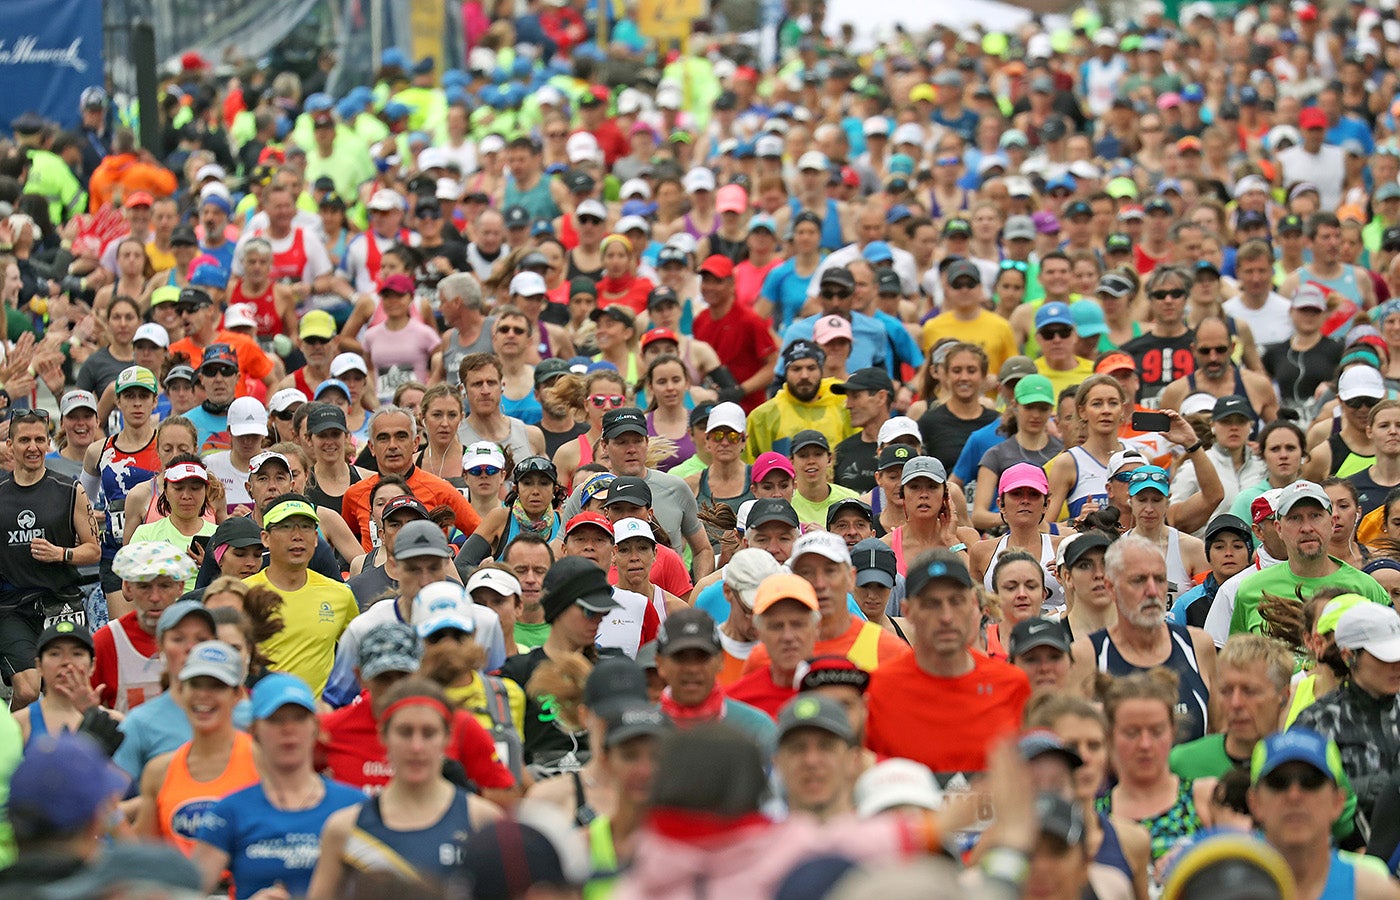 Here's the latest on the 2020 Boston Marathon in the wake of the